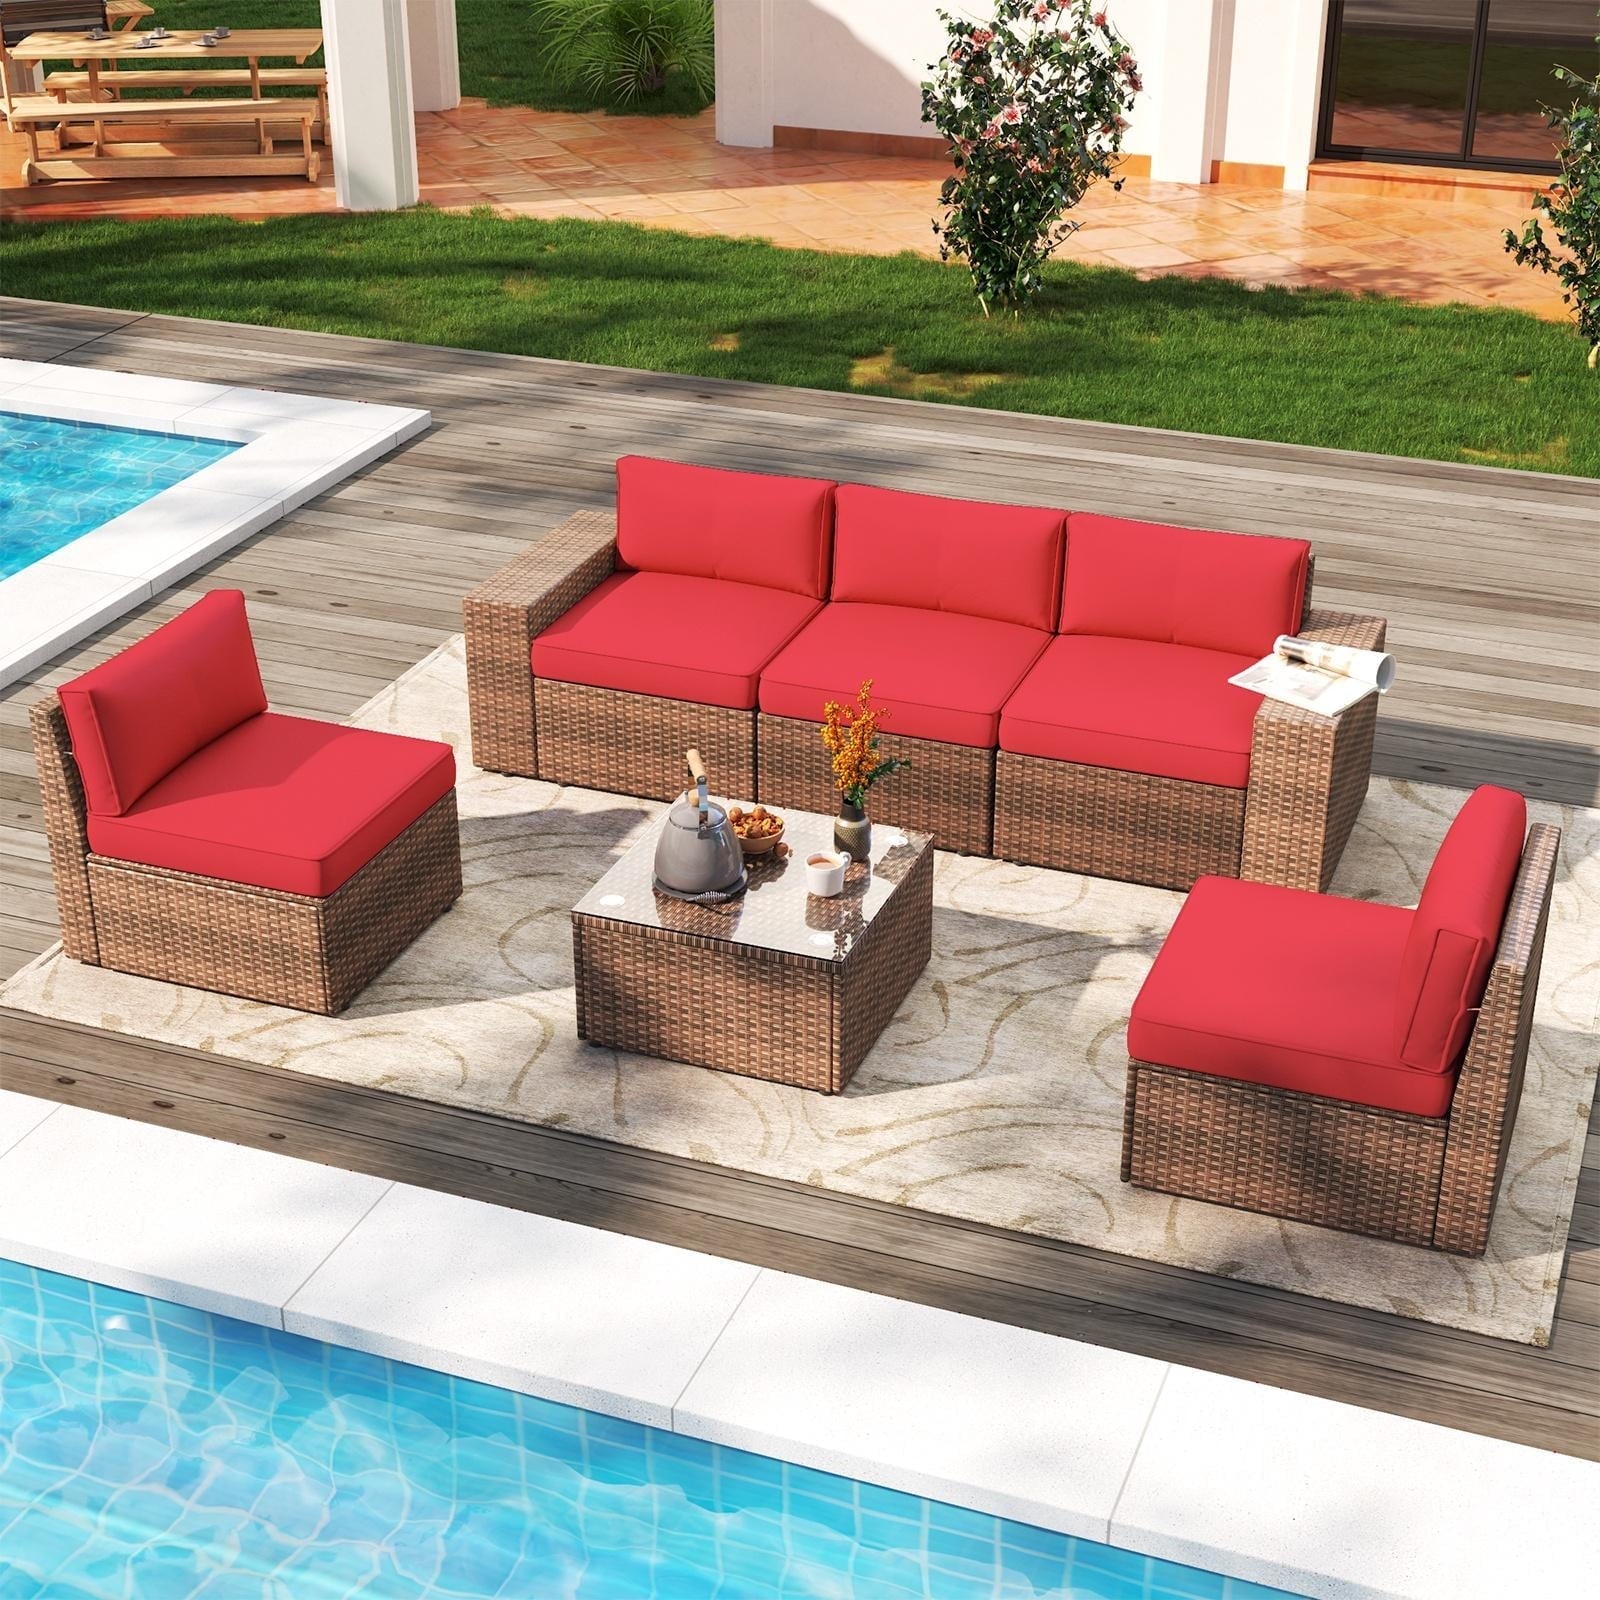 6 Pieces Patio Furniture Sets, Outdoor Sectional Rattan Sofa Set, Patio Furniture Set with Coffee Table, Red